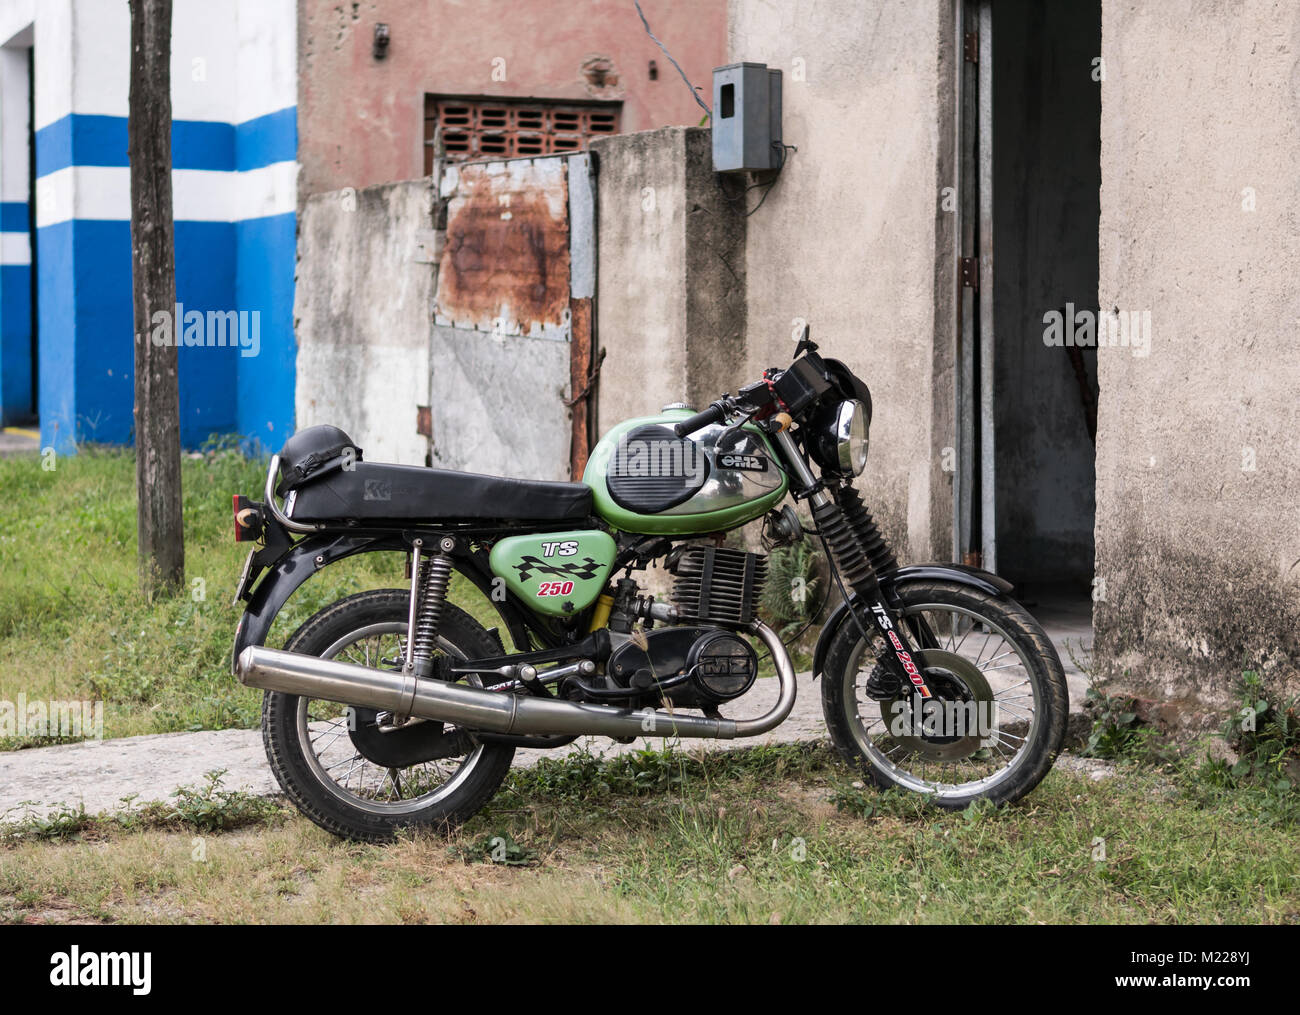 Las Tunas, Cuba - September 4, 2017: An MZ TS 250 Motorcycle parked in front of the entrance of a residential building. Stock Photo